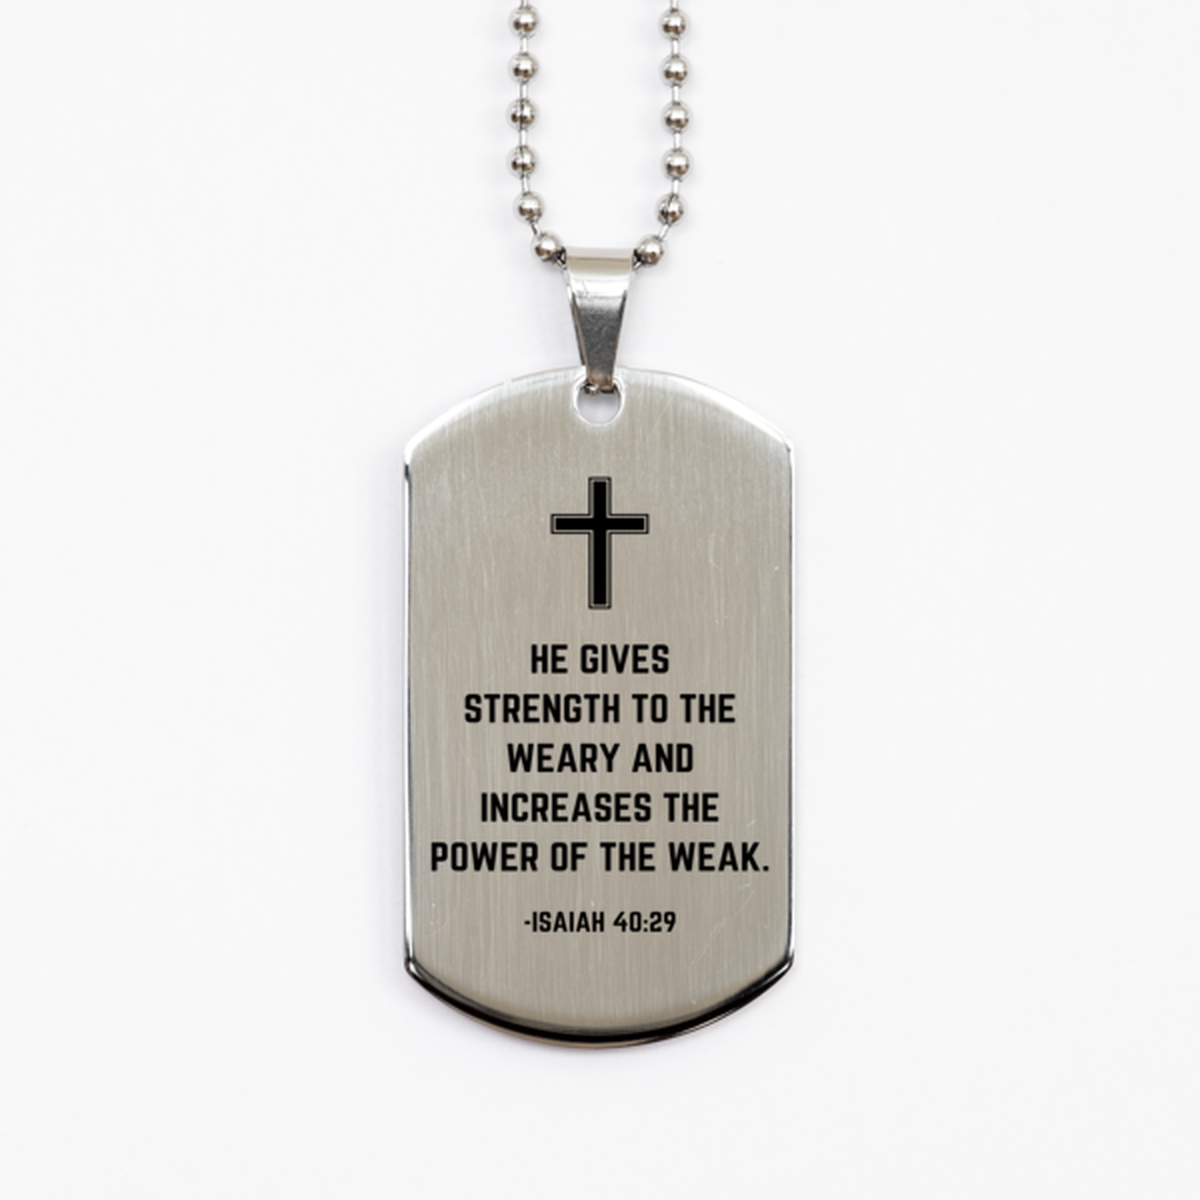 Baptism Gifts For Teenage Boys Girls, Christian Bible Verse Silver Dog Tag, He gives strength to the weary, Confirmation Gifts, Bible Verse Necklace for Son, Godson, Grandson, Nephew